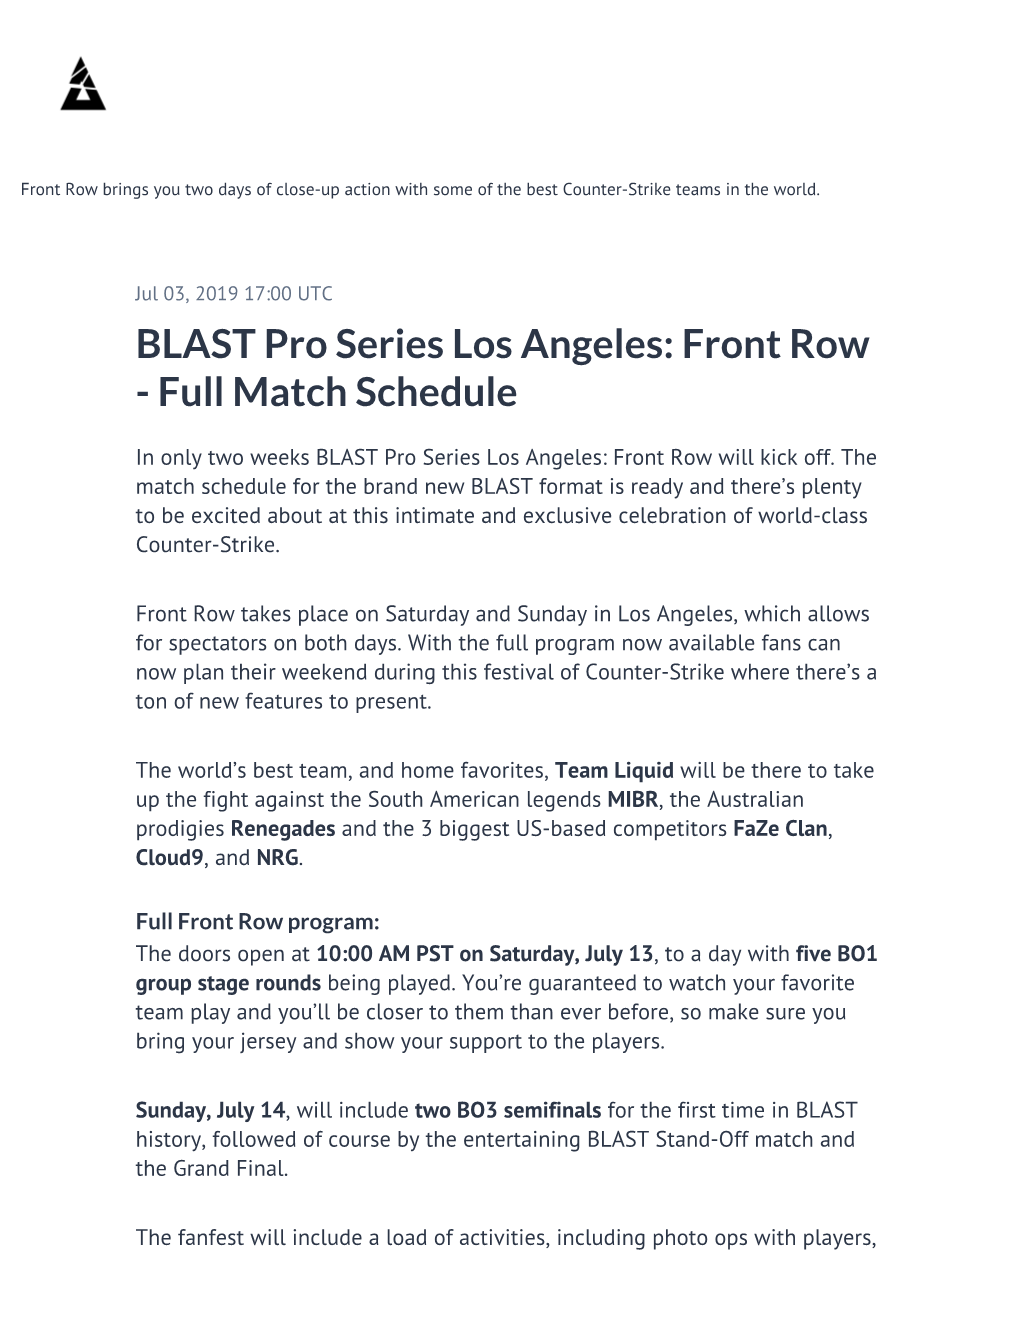 BLAST Pro Series Los Angeles: Front Row - Full Match Schedule